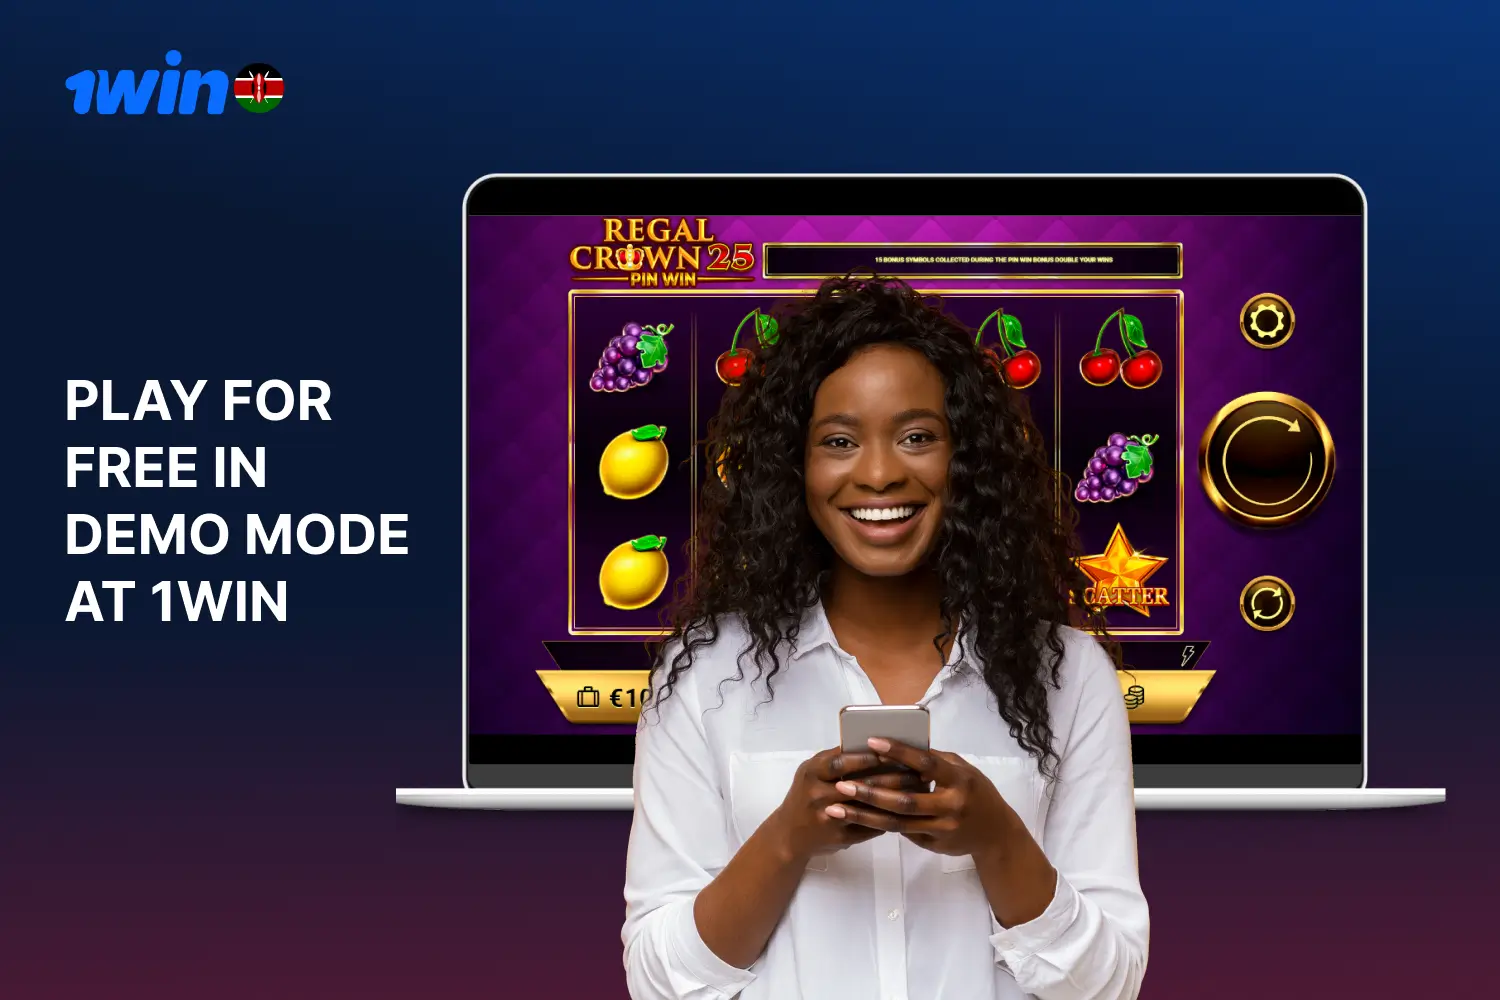 Gamblers from Kenya can play at the casino in demo mode and experience all the benefits of 1win games without investing money